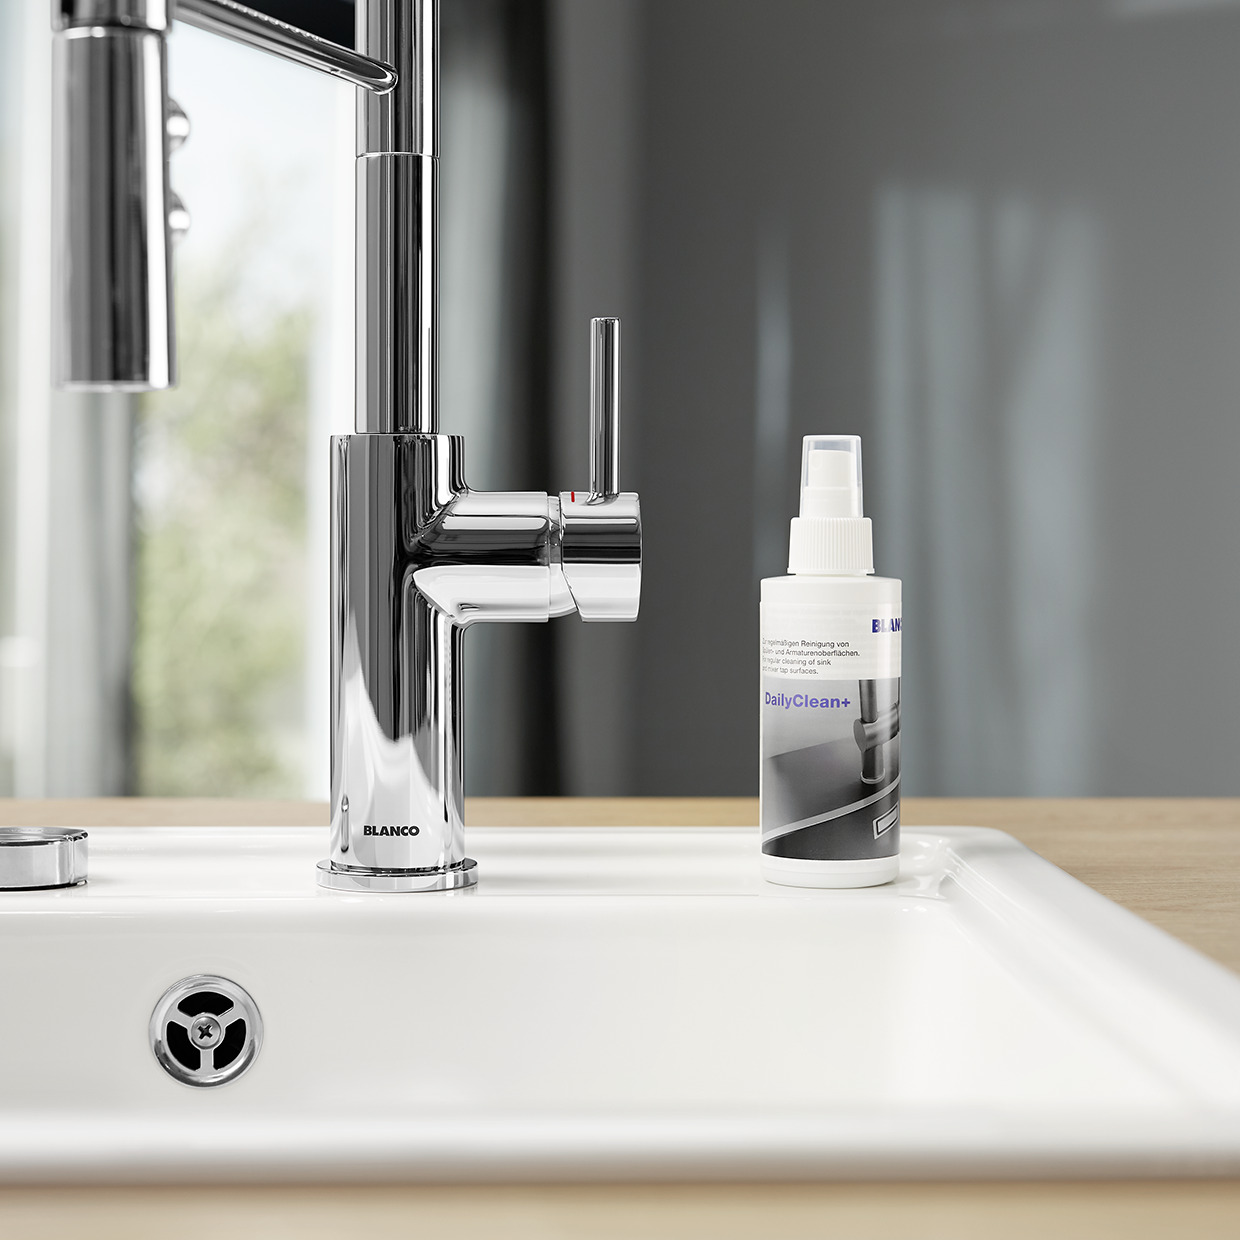 You can get your mixer tap shining with the right care and cleaning.